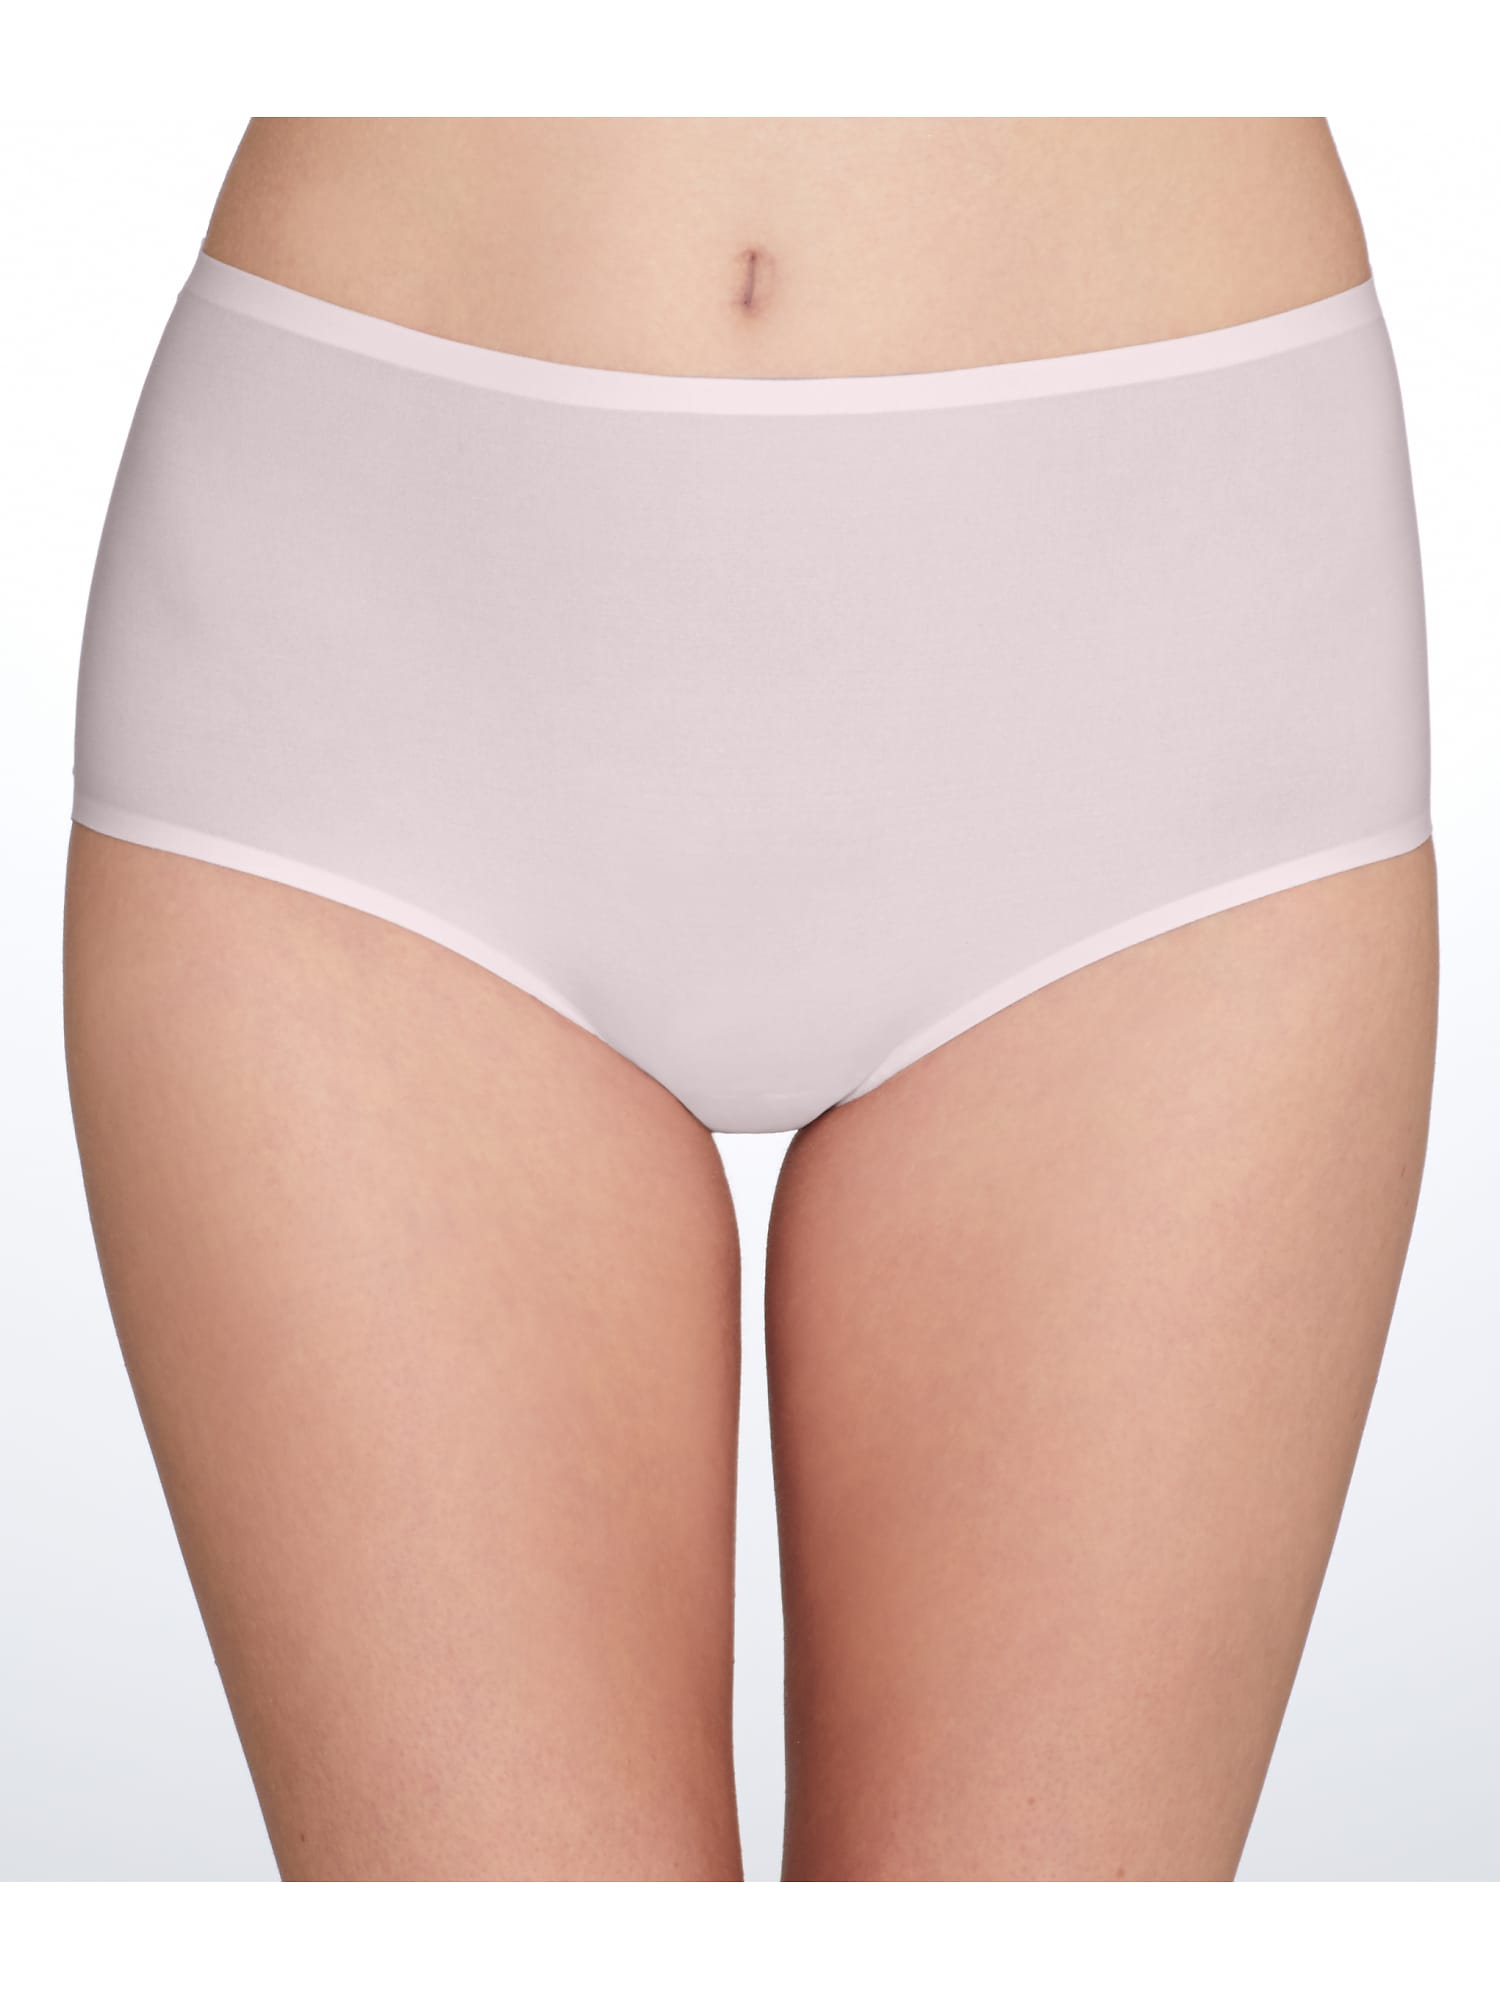 Chantelle Soft Stretch Full Brief Panty - Women's #2647